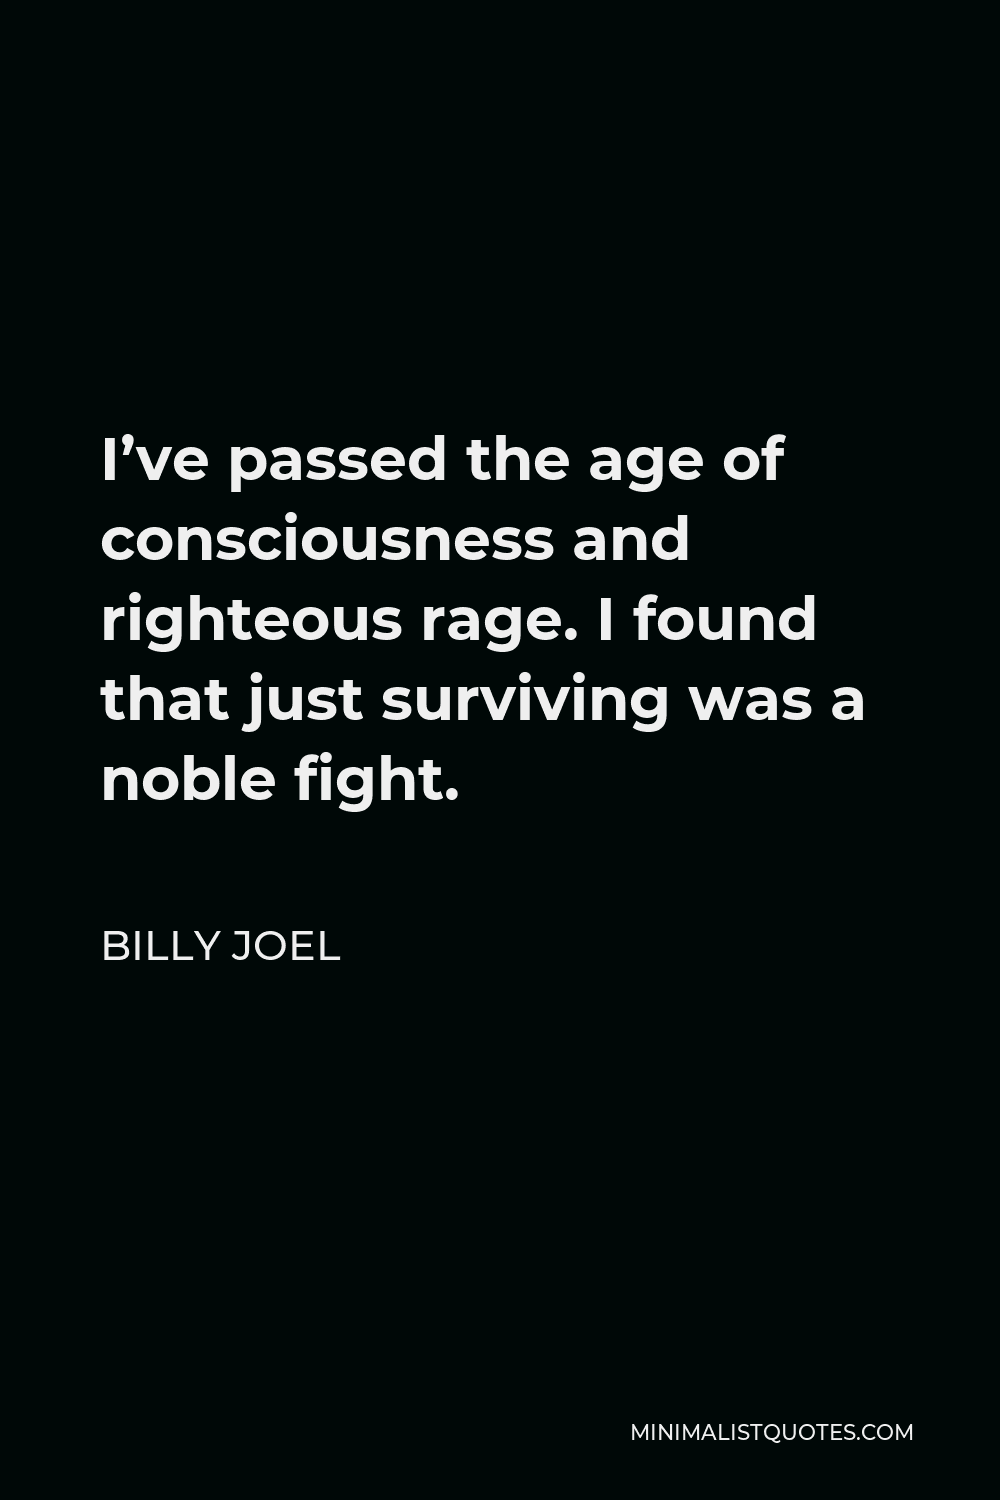 Billy Joel Quote - I’ve passed the age of consciousness and righteous rage. I found that just surviving was a noble fight.